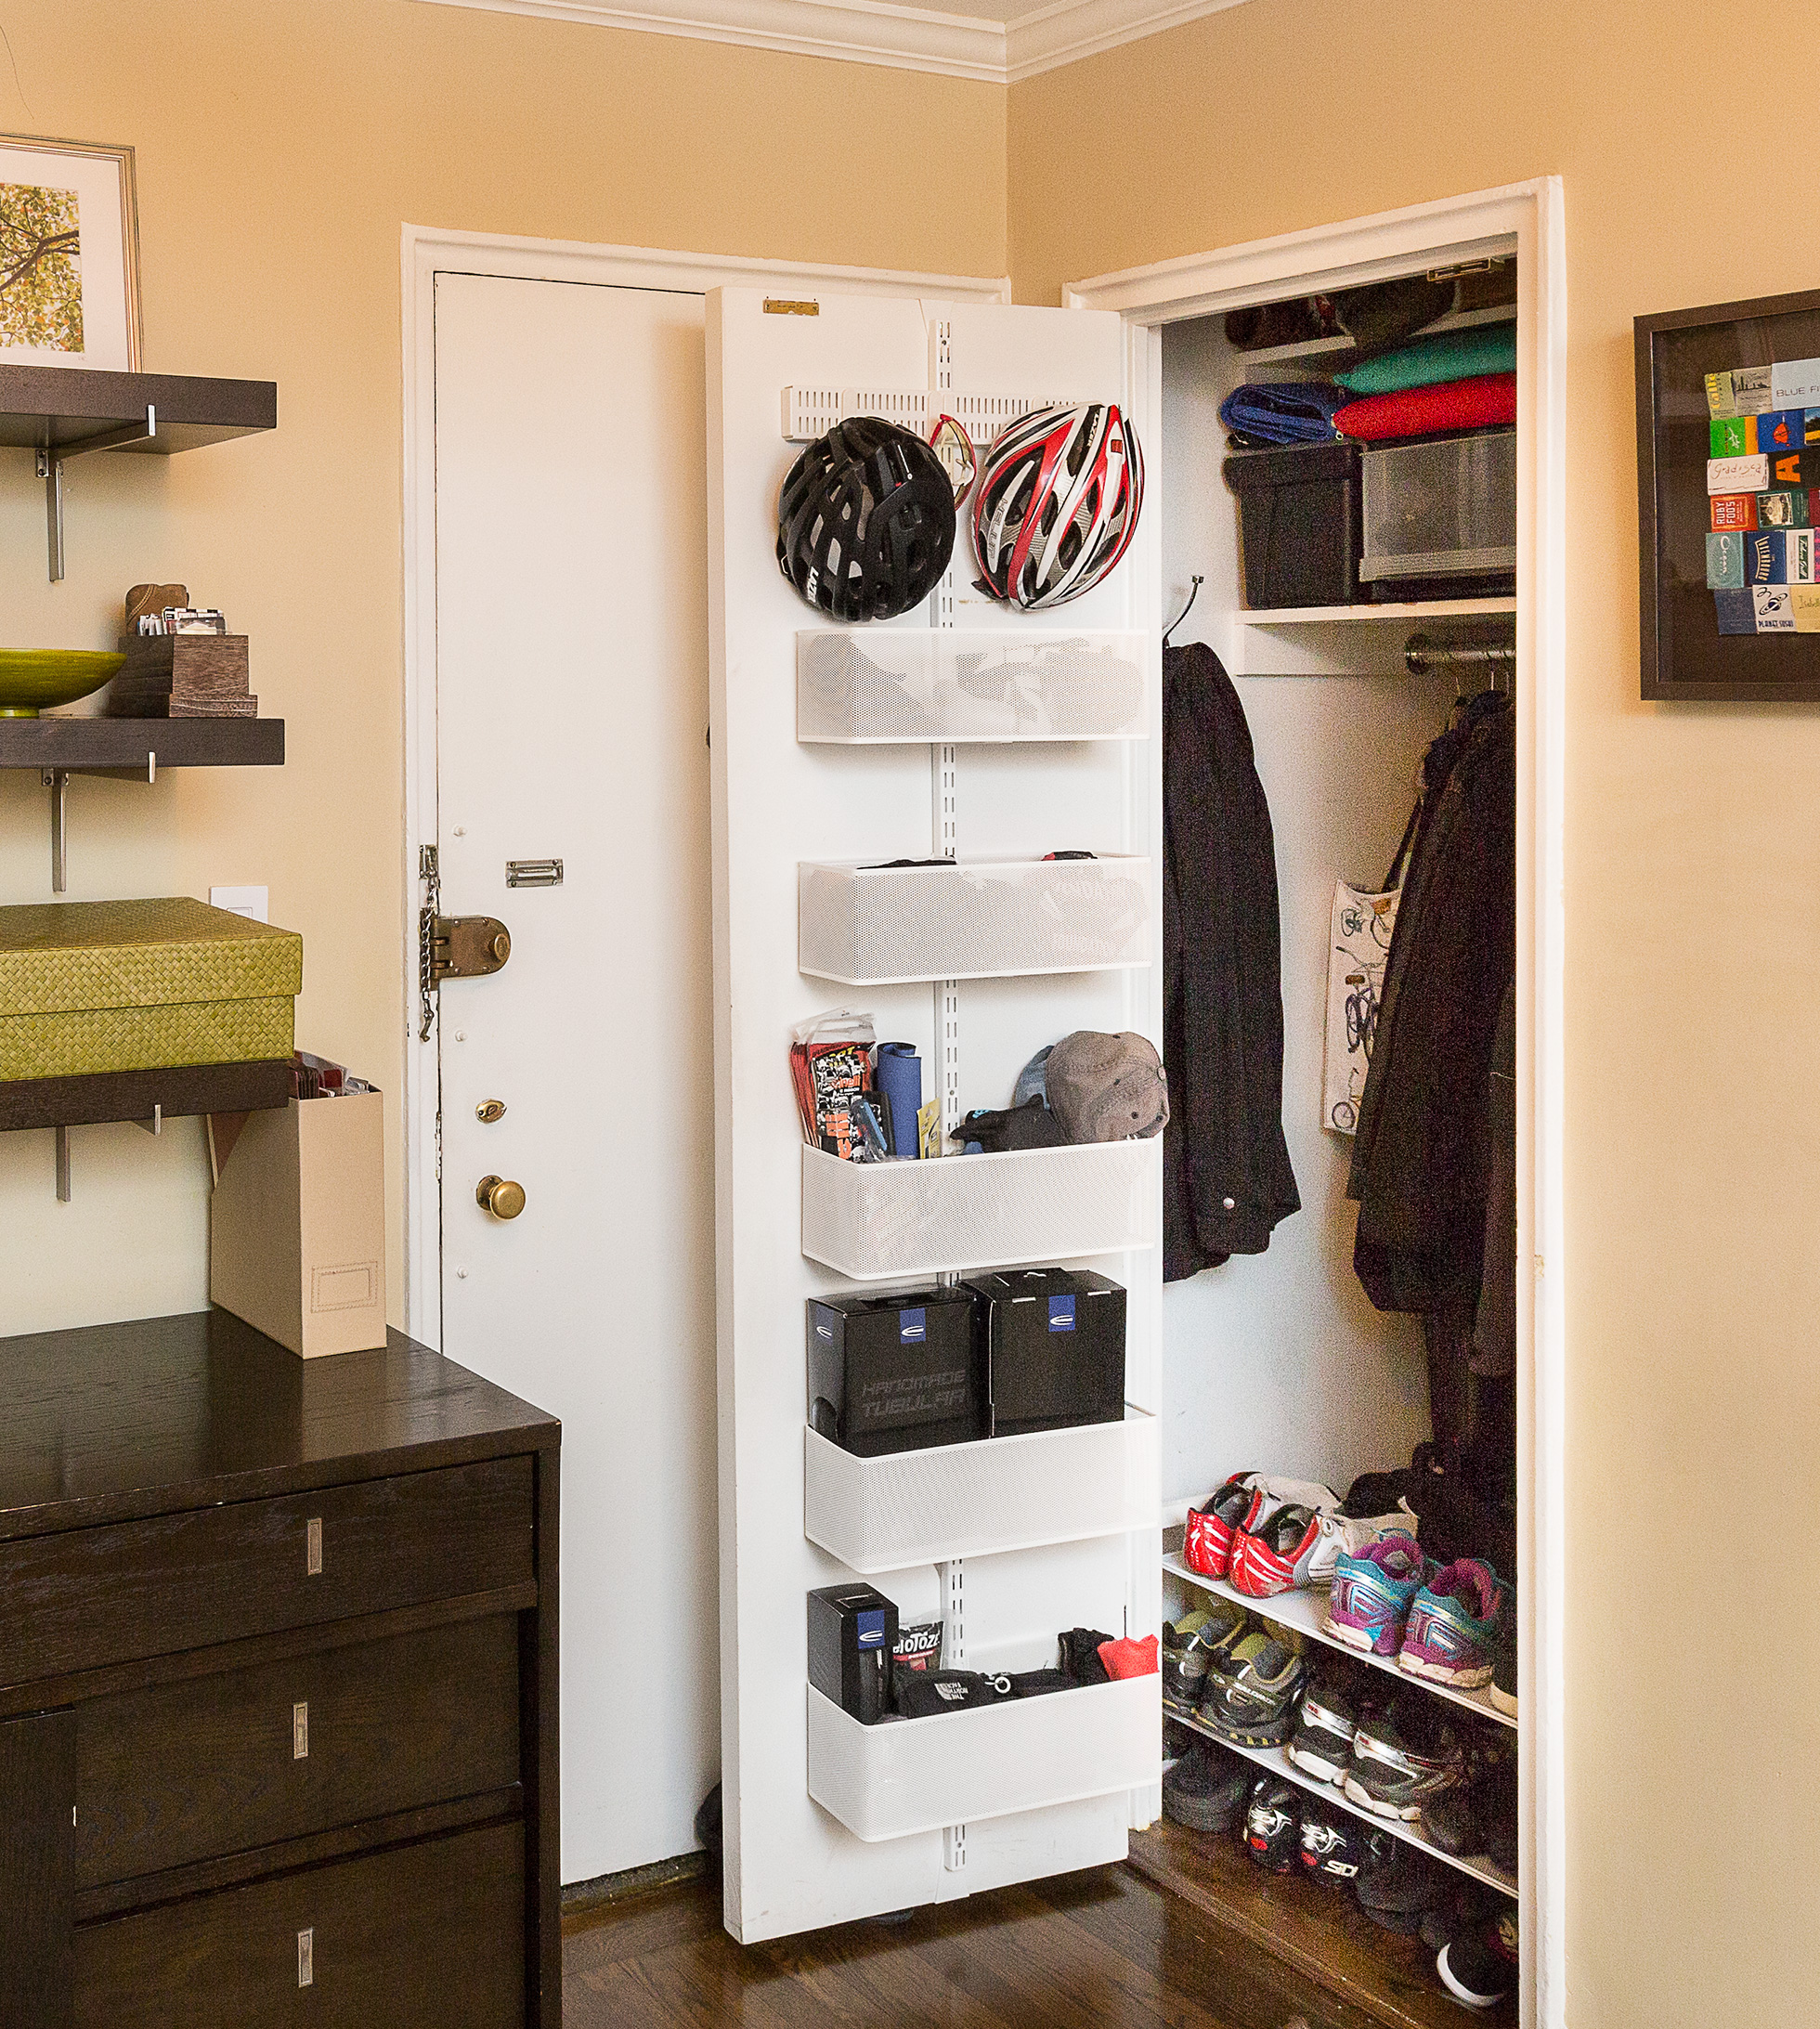 Storage Solutions for Small Spaces | Home Organizing Ideas